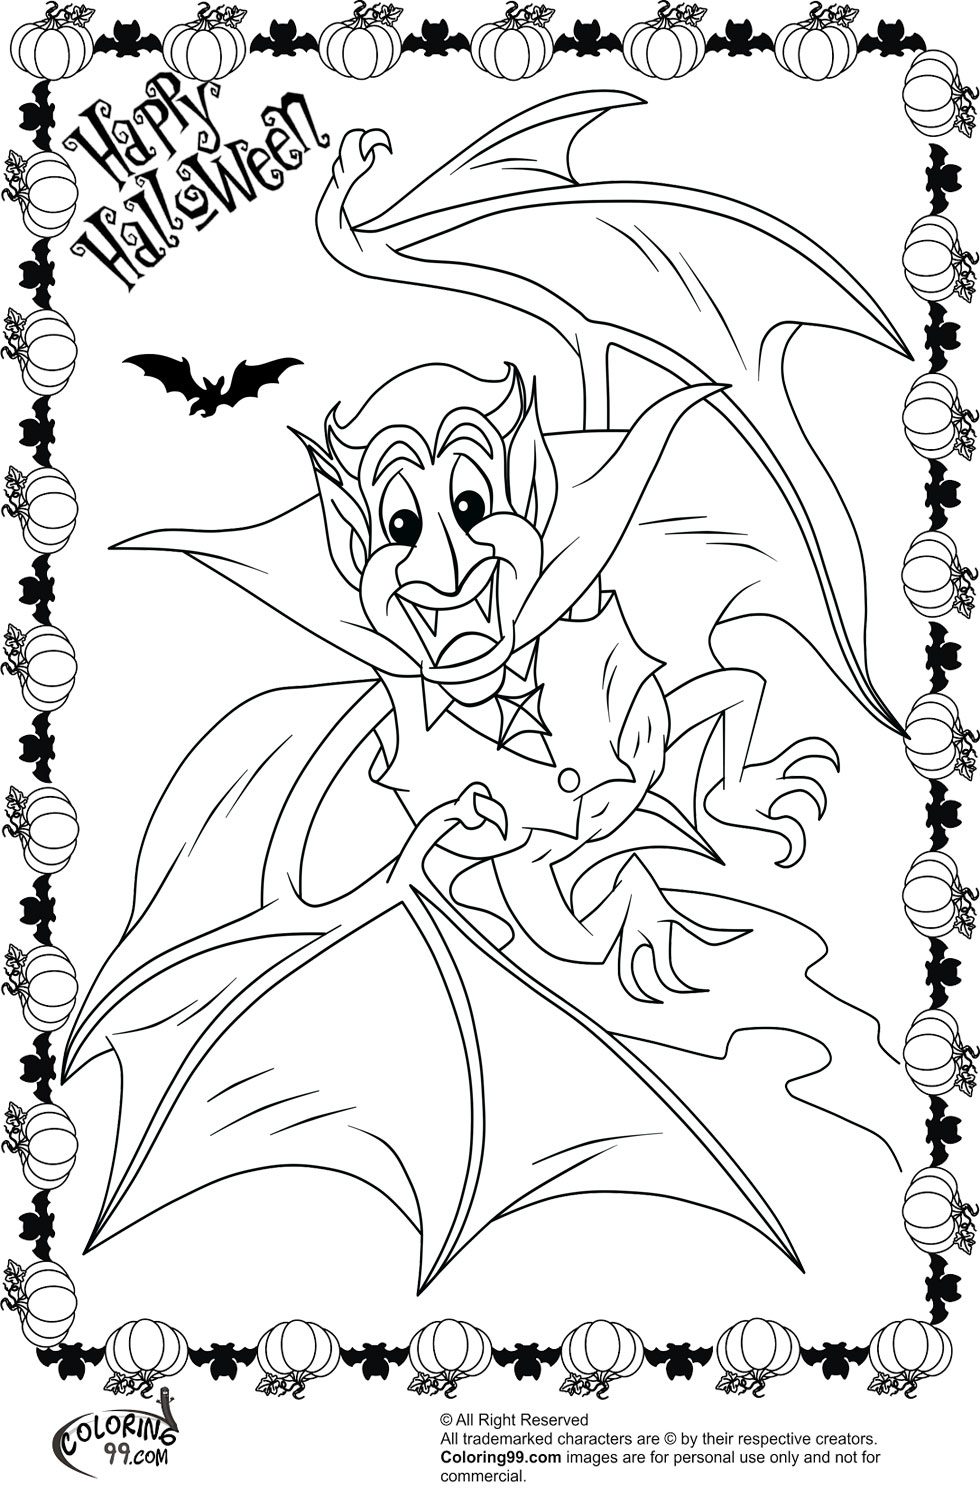 Halloween Dracula Coloring Pages | Team colors